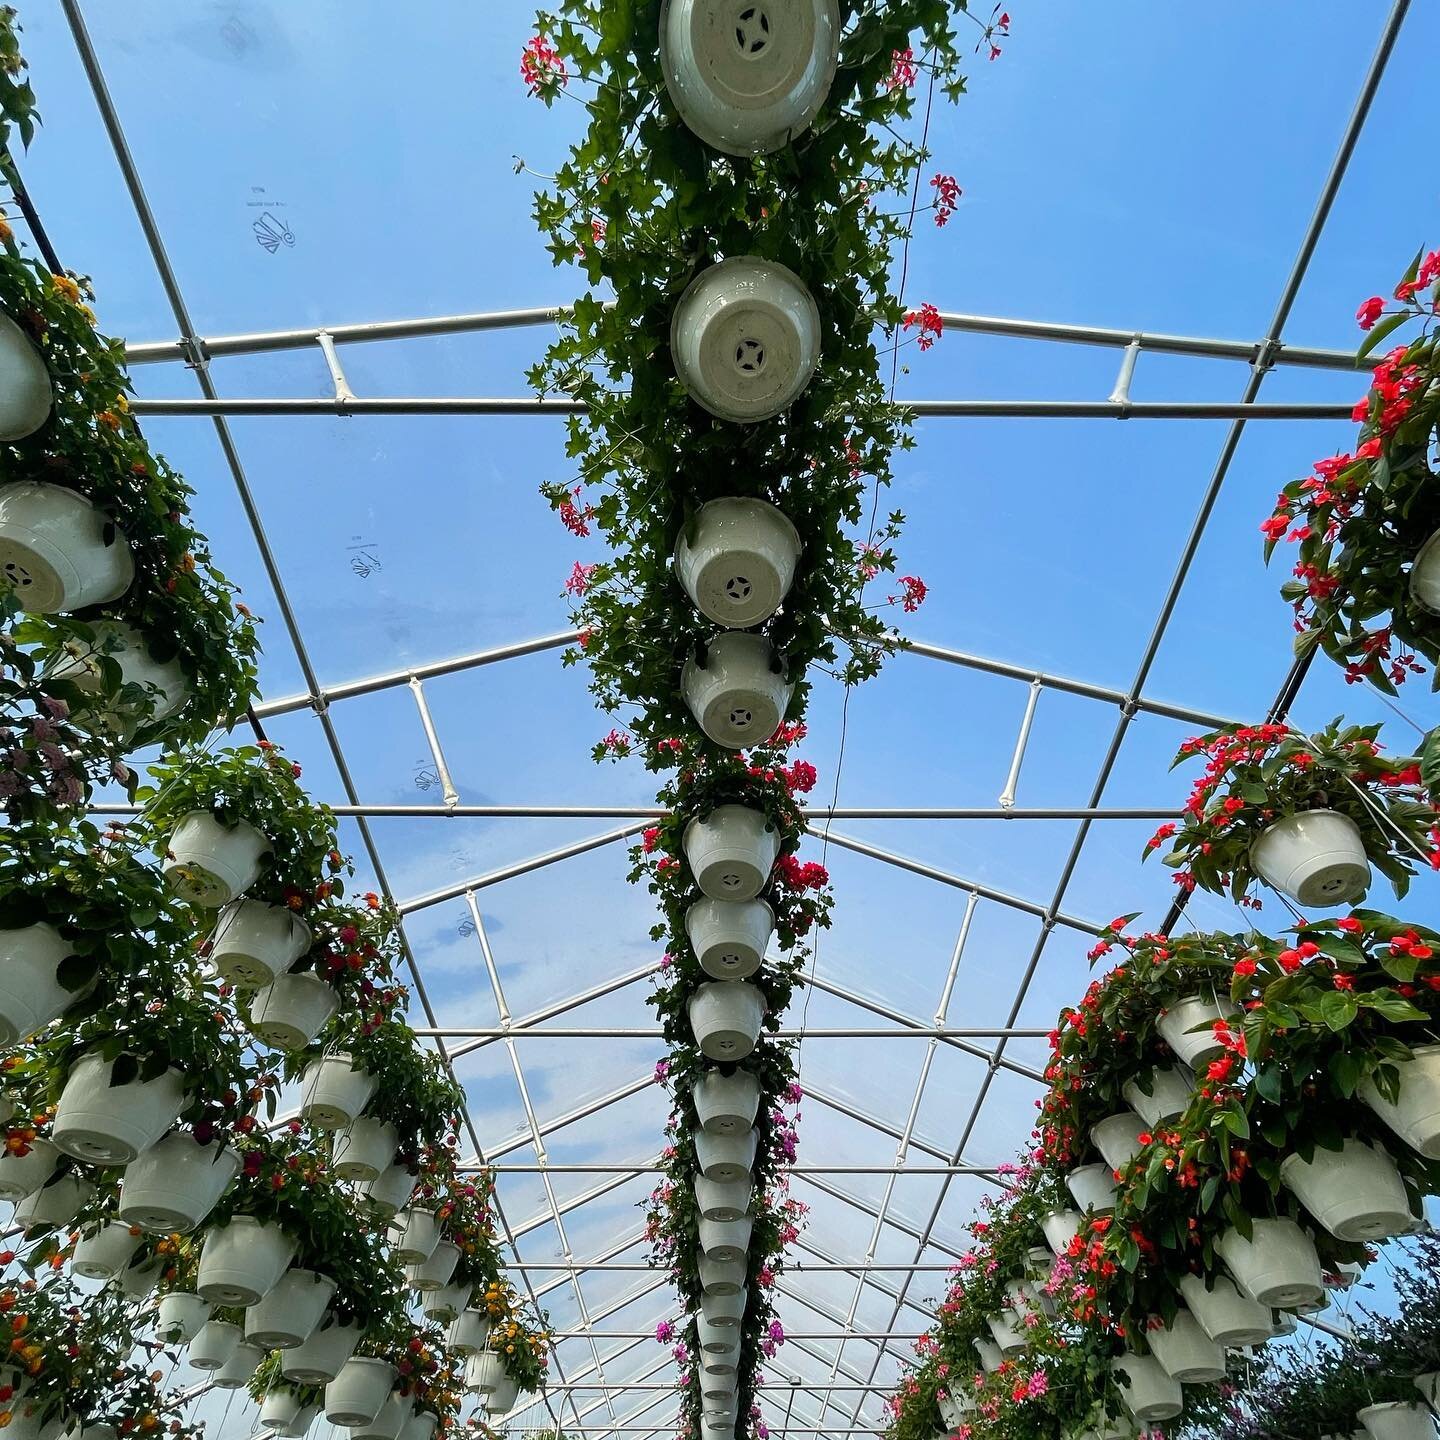 Have you gotten your hanging baskets yet?! 

Shop our greenhouses on this gloomy day